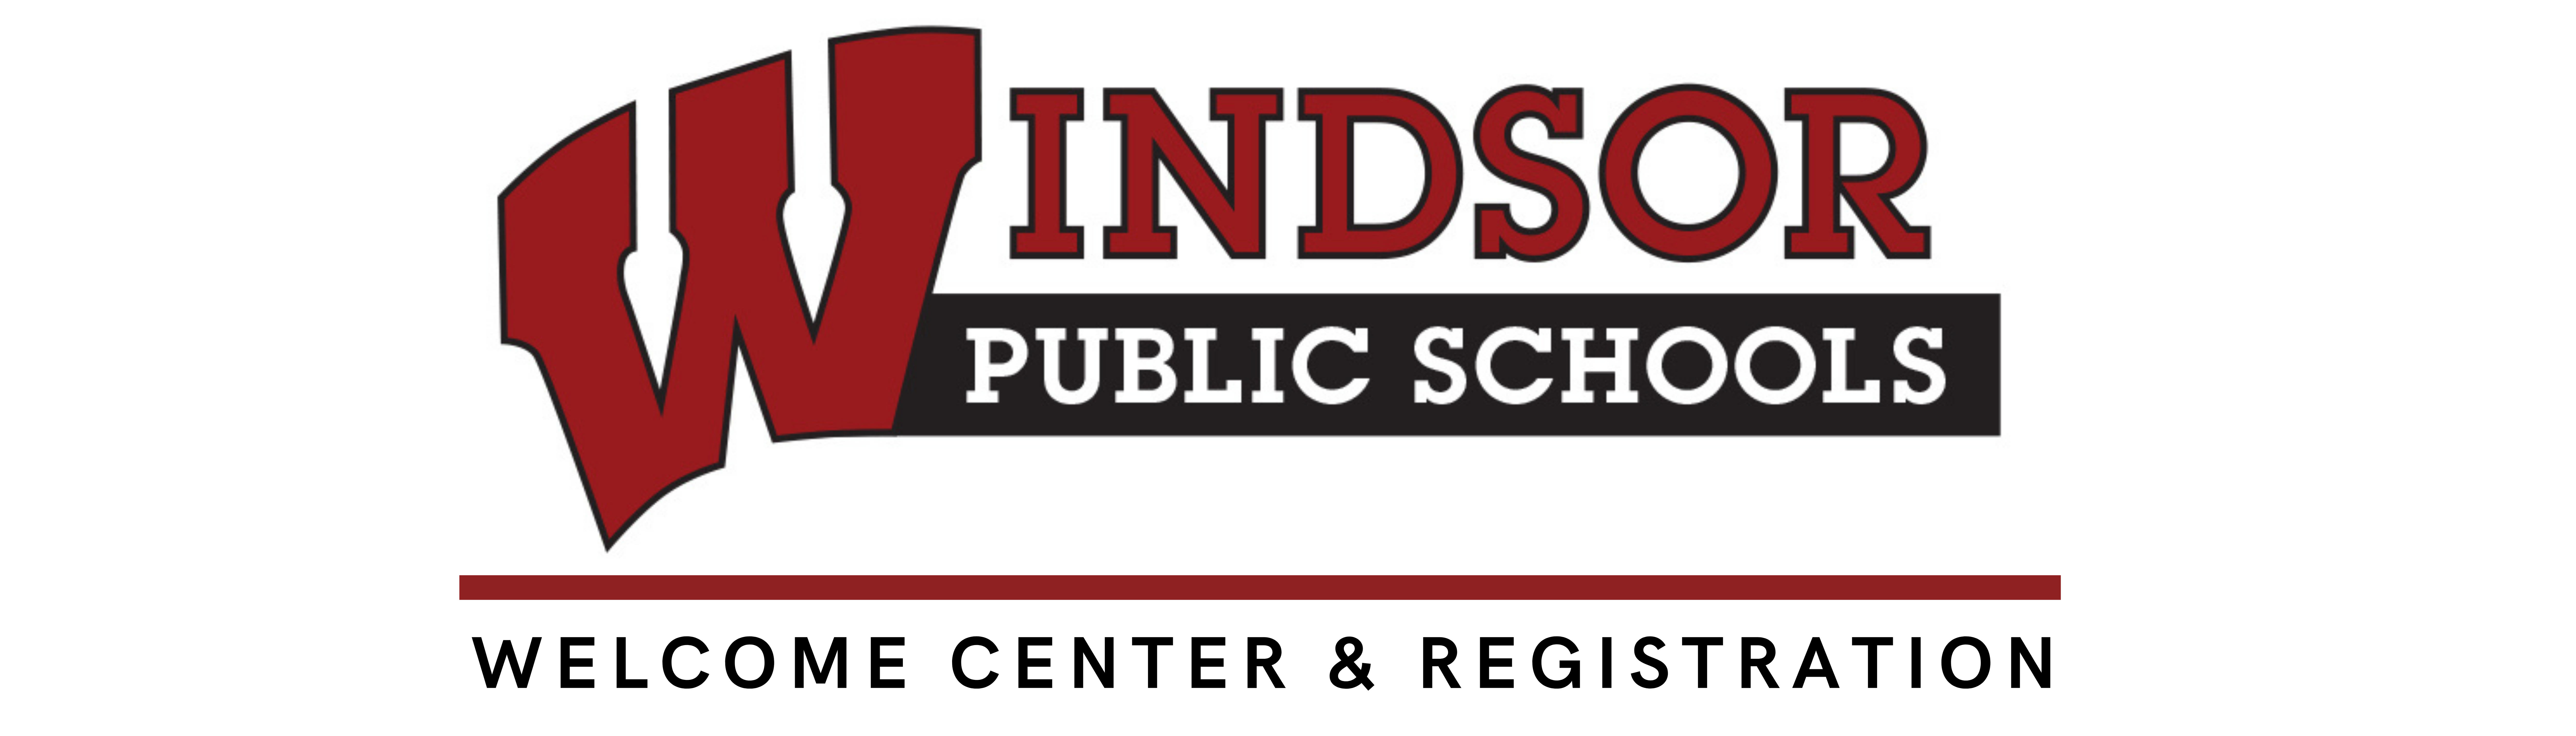 windsor public schools logo with welcome center and registration written under 